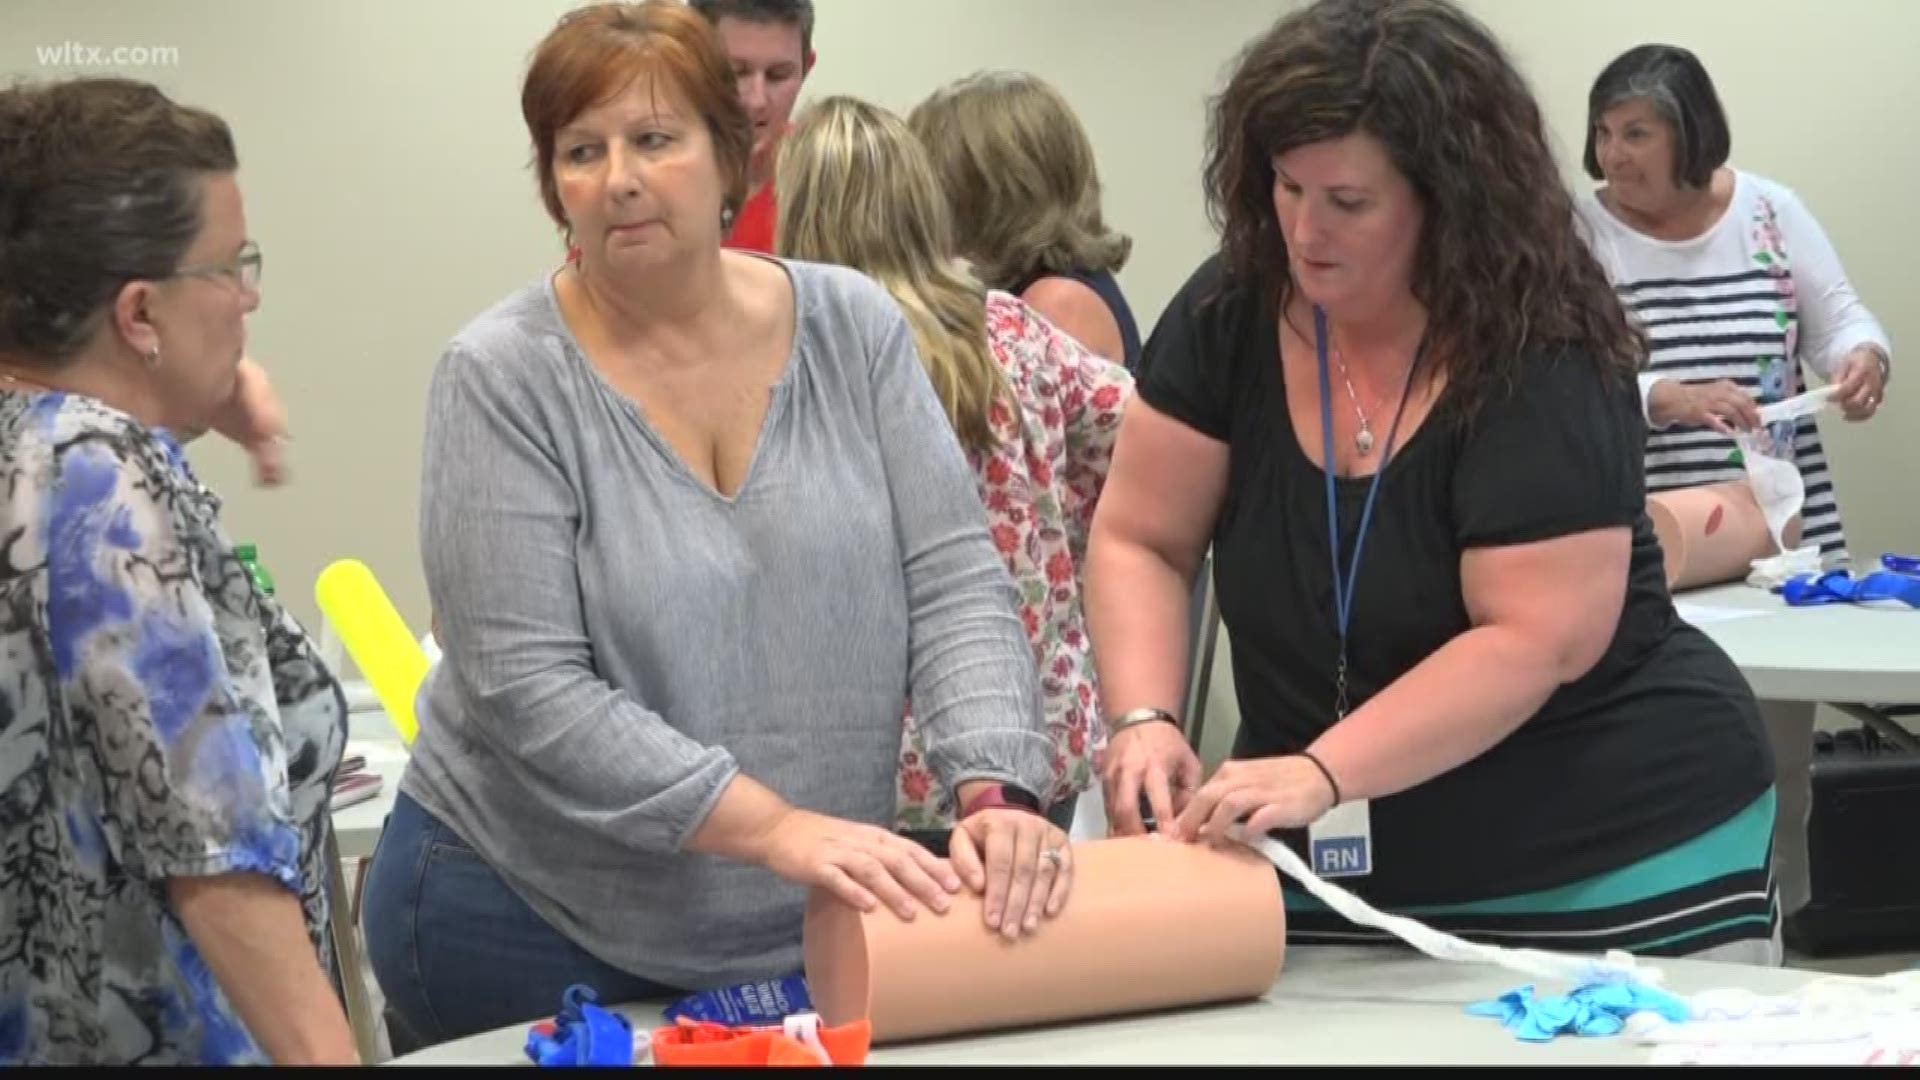 In this two-hour class called "Stop-the-Bleed," school nurses are learning how to train others in emergency procedures.